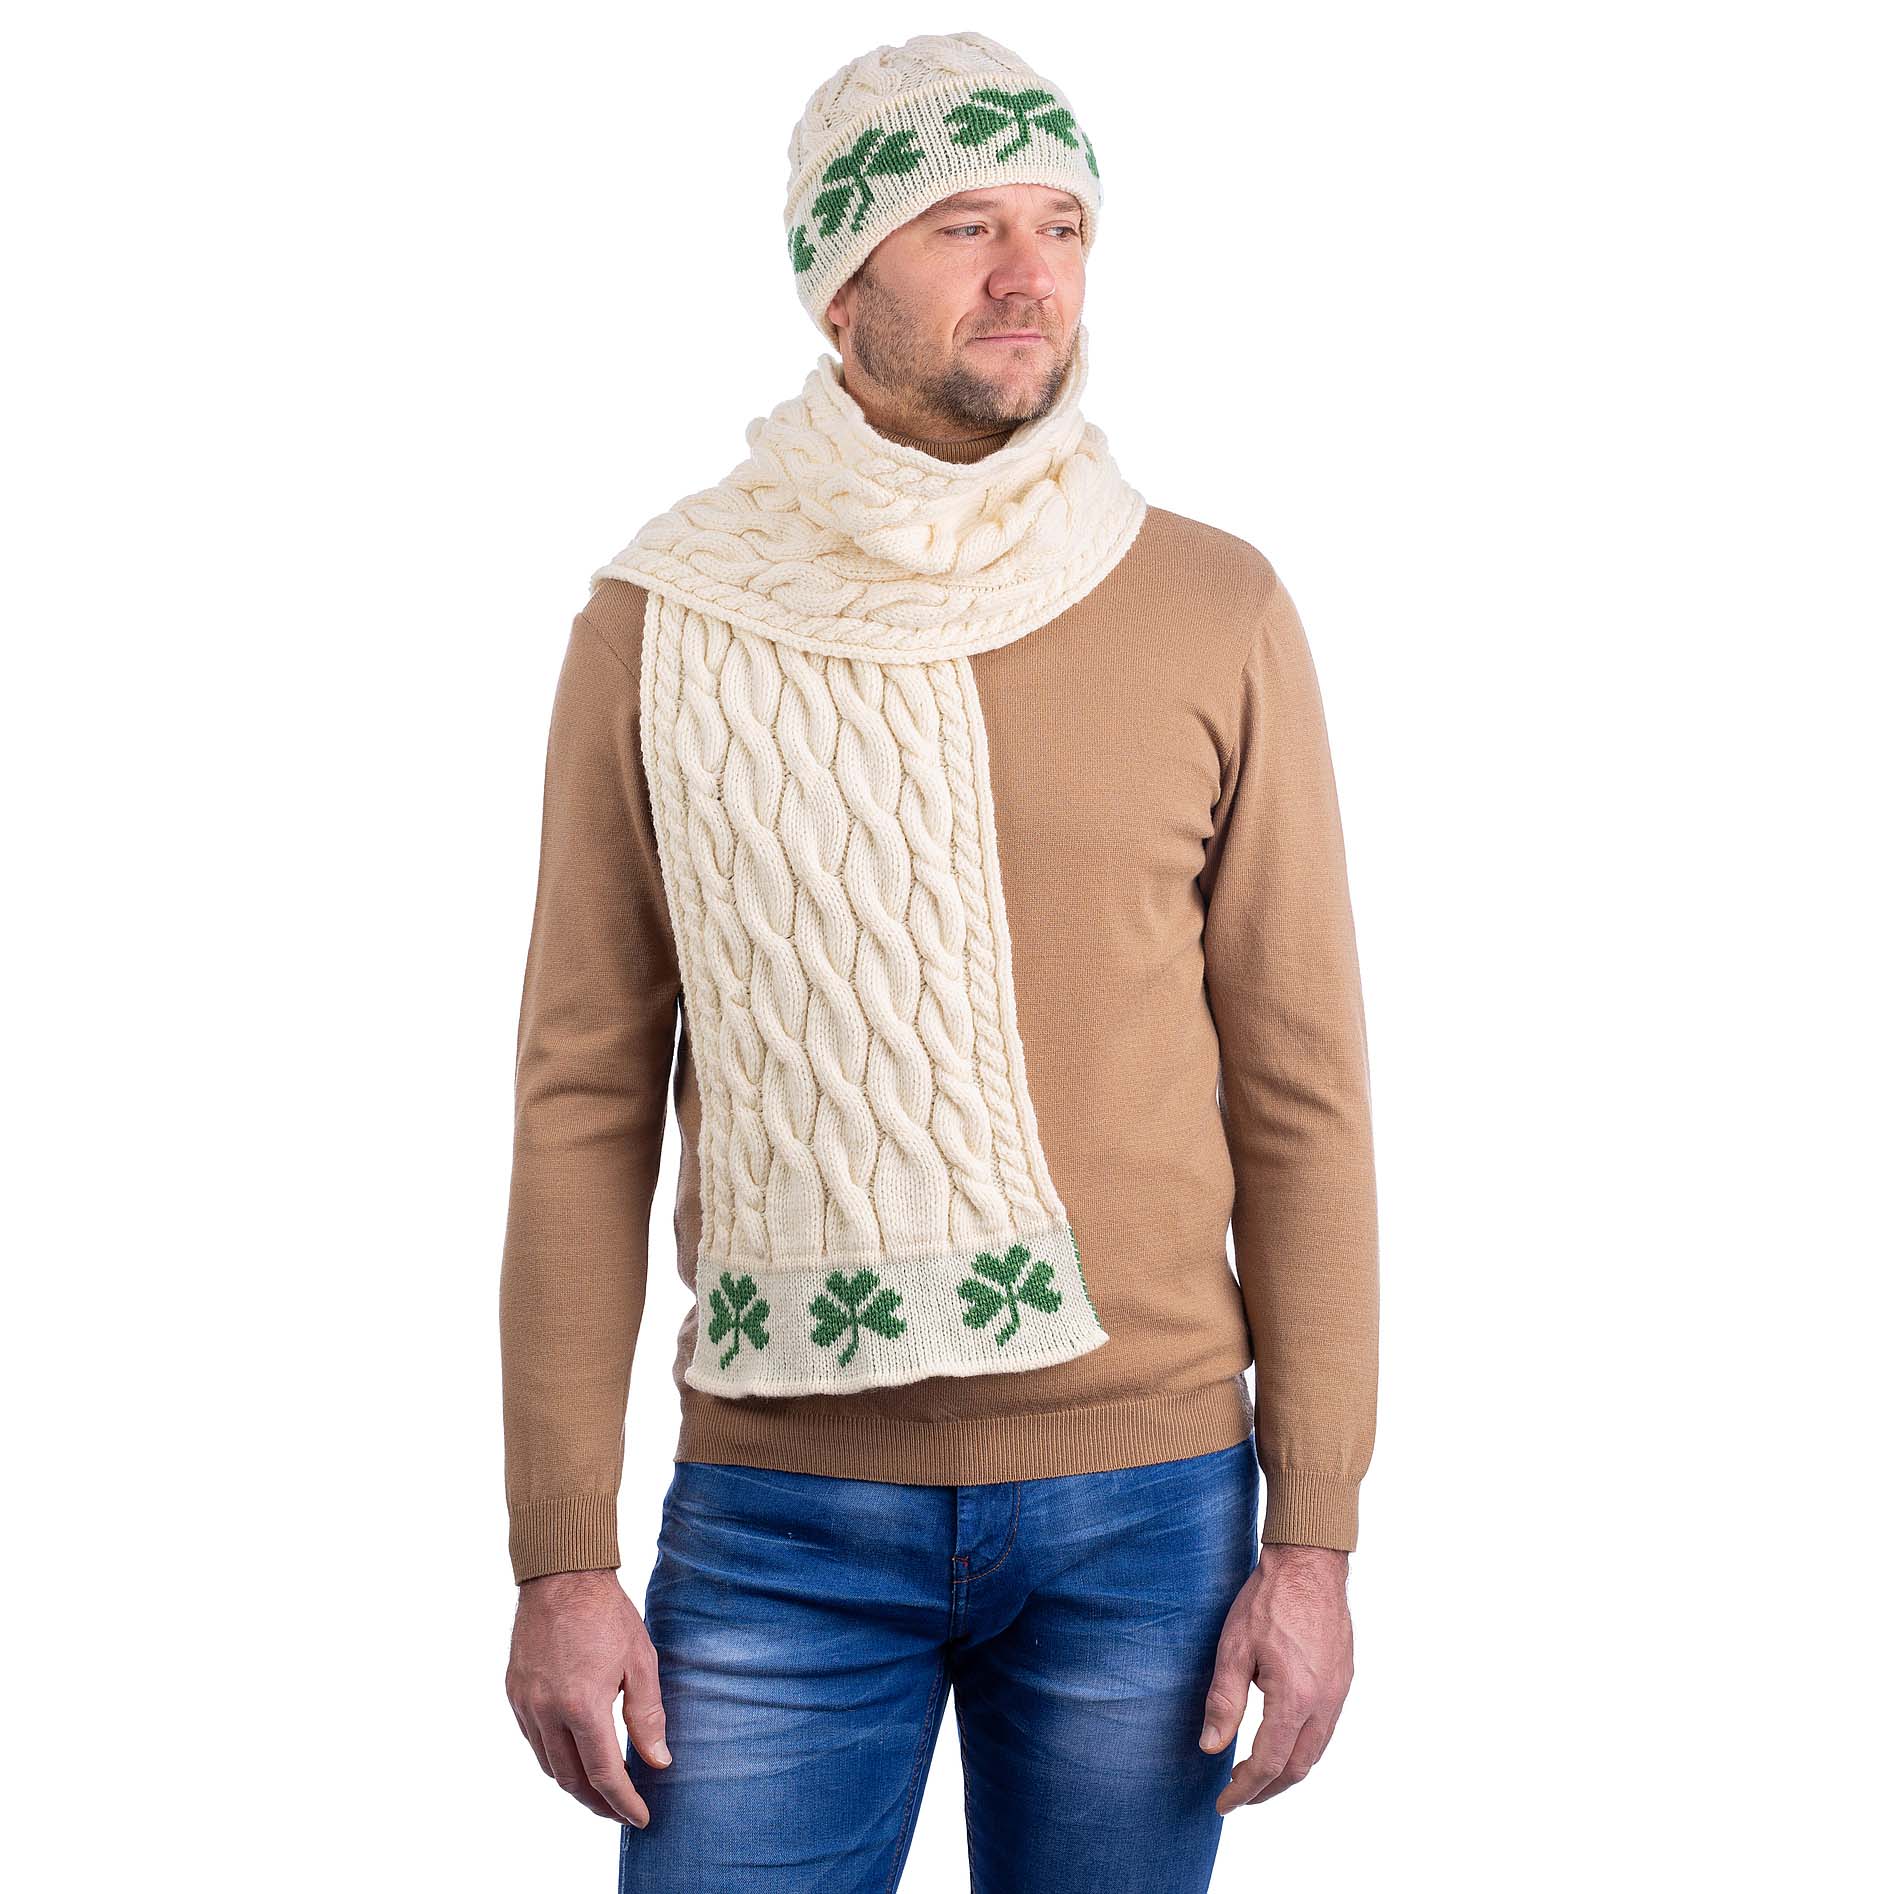 Product image for Irish Scarf | Merino Wool Cable Knit Shamrock Mens Scarf